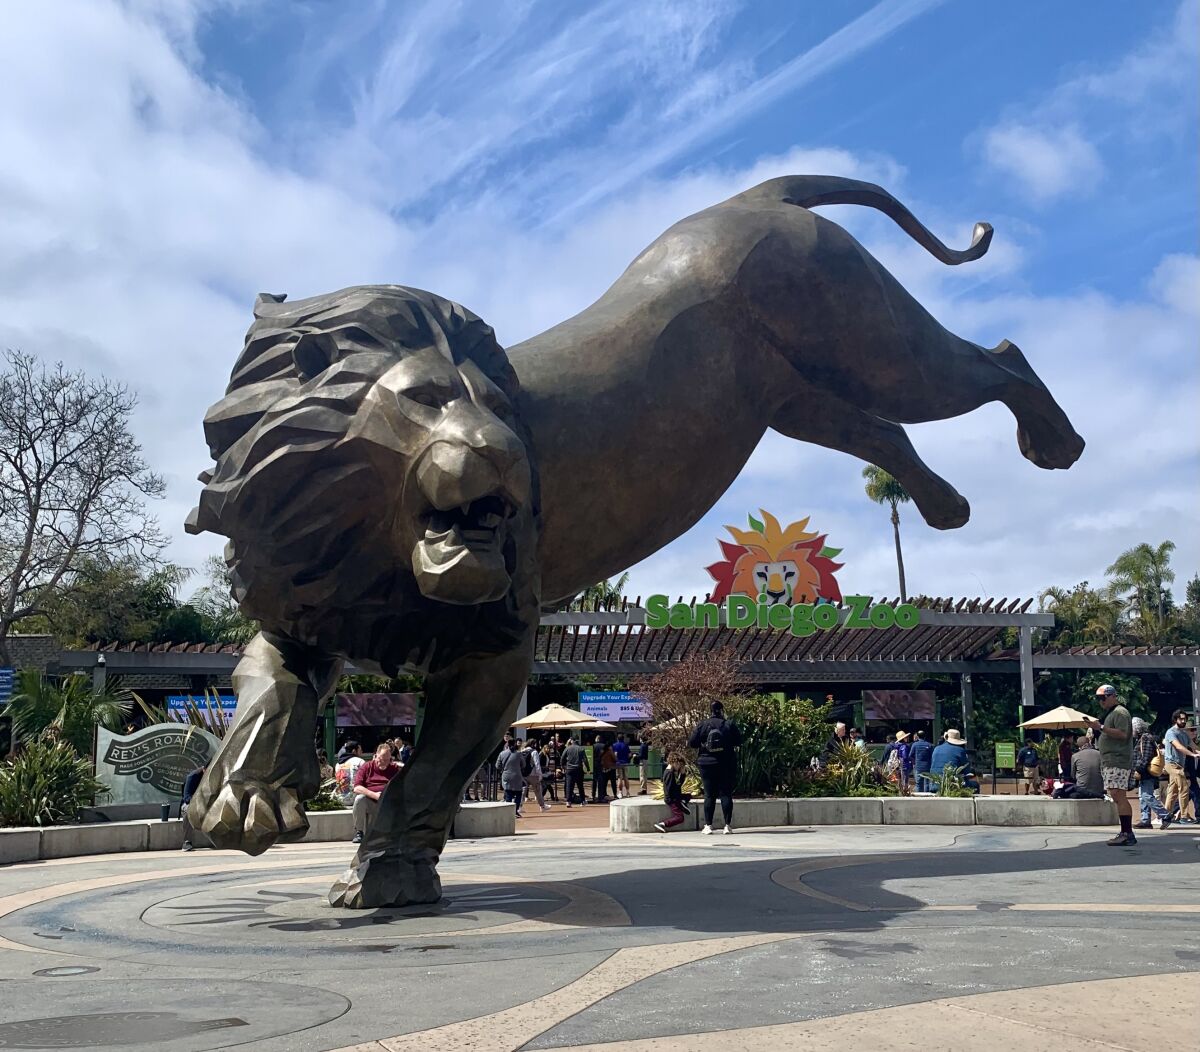 Rex the lion, a monumental 27-foot bronze sculpture, greets visitors at the San Diego Zoo's entrance plaza.